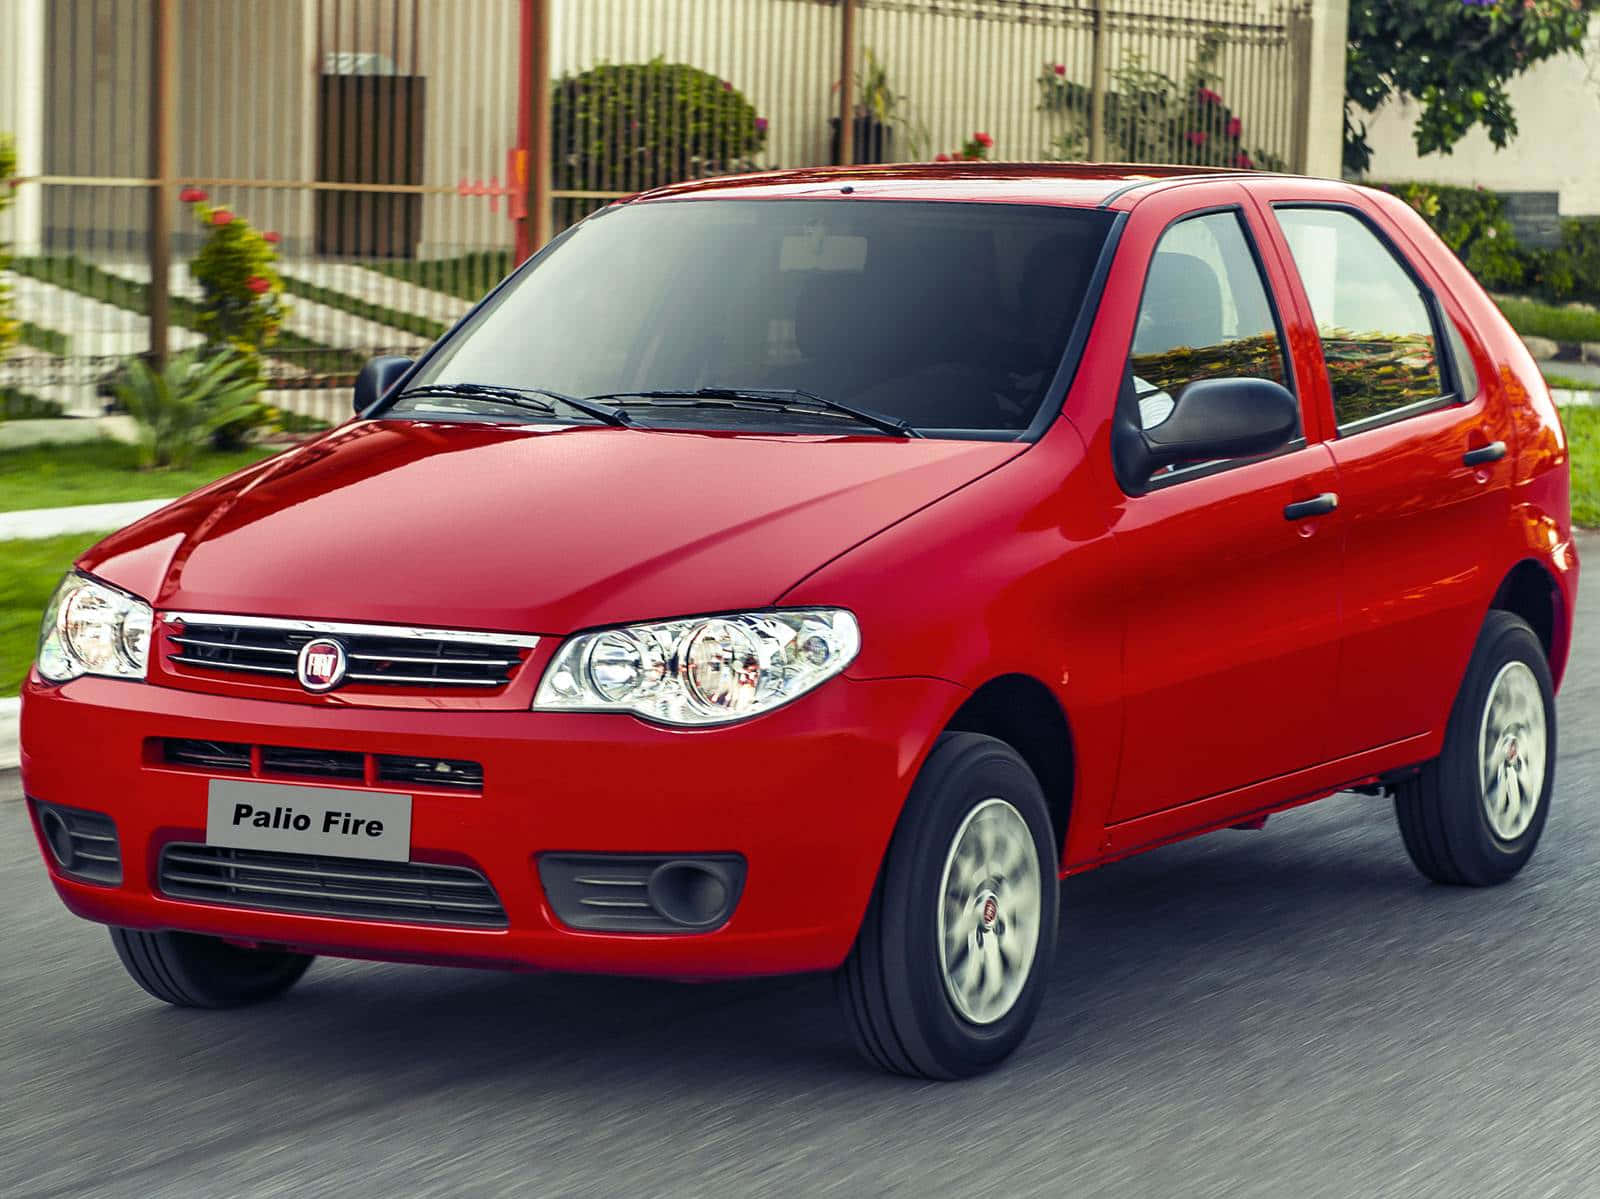 Fiat Palio - A perfect blend of style and performance Wallpaper